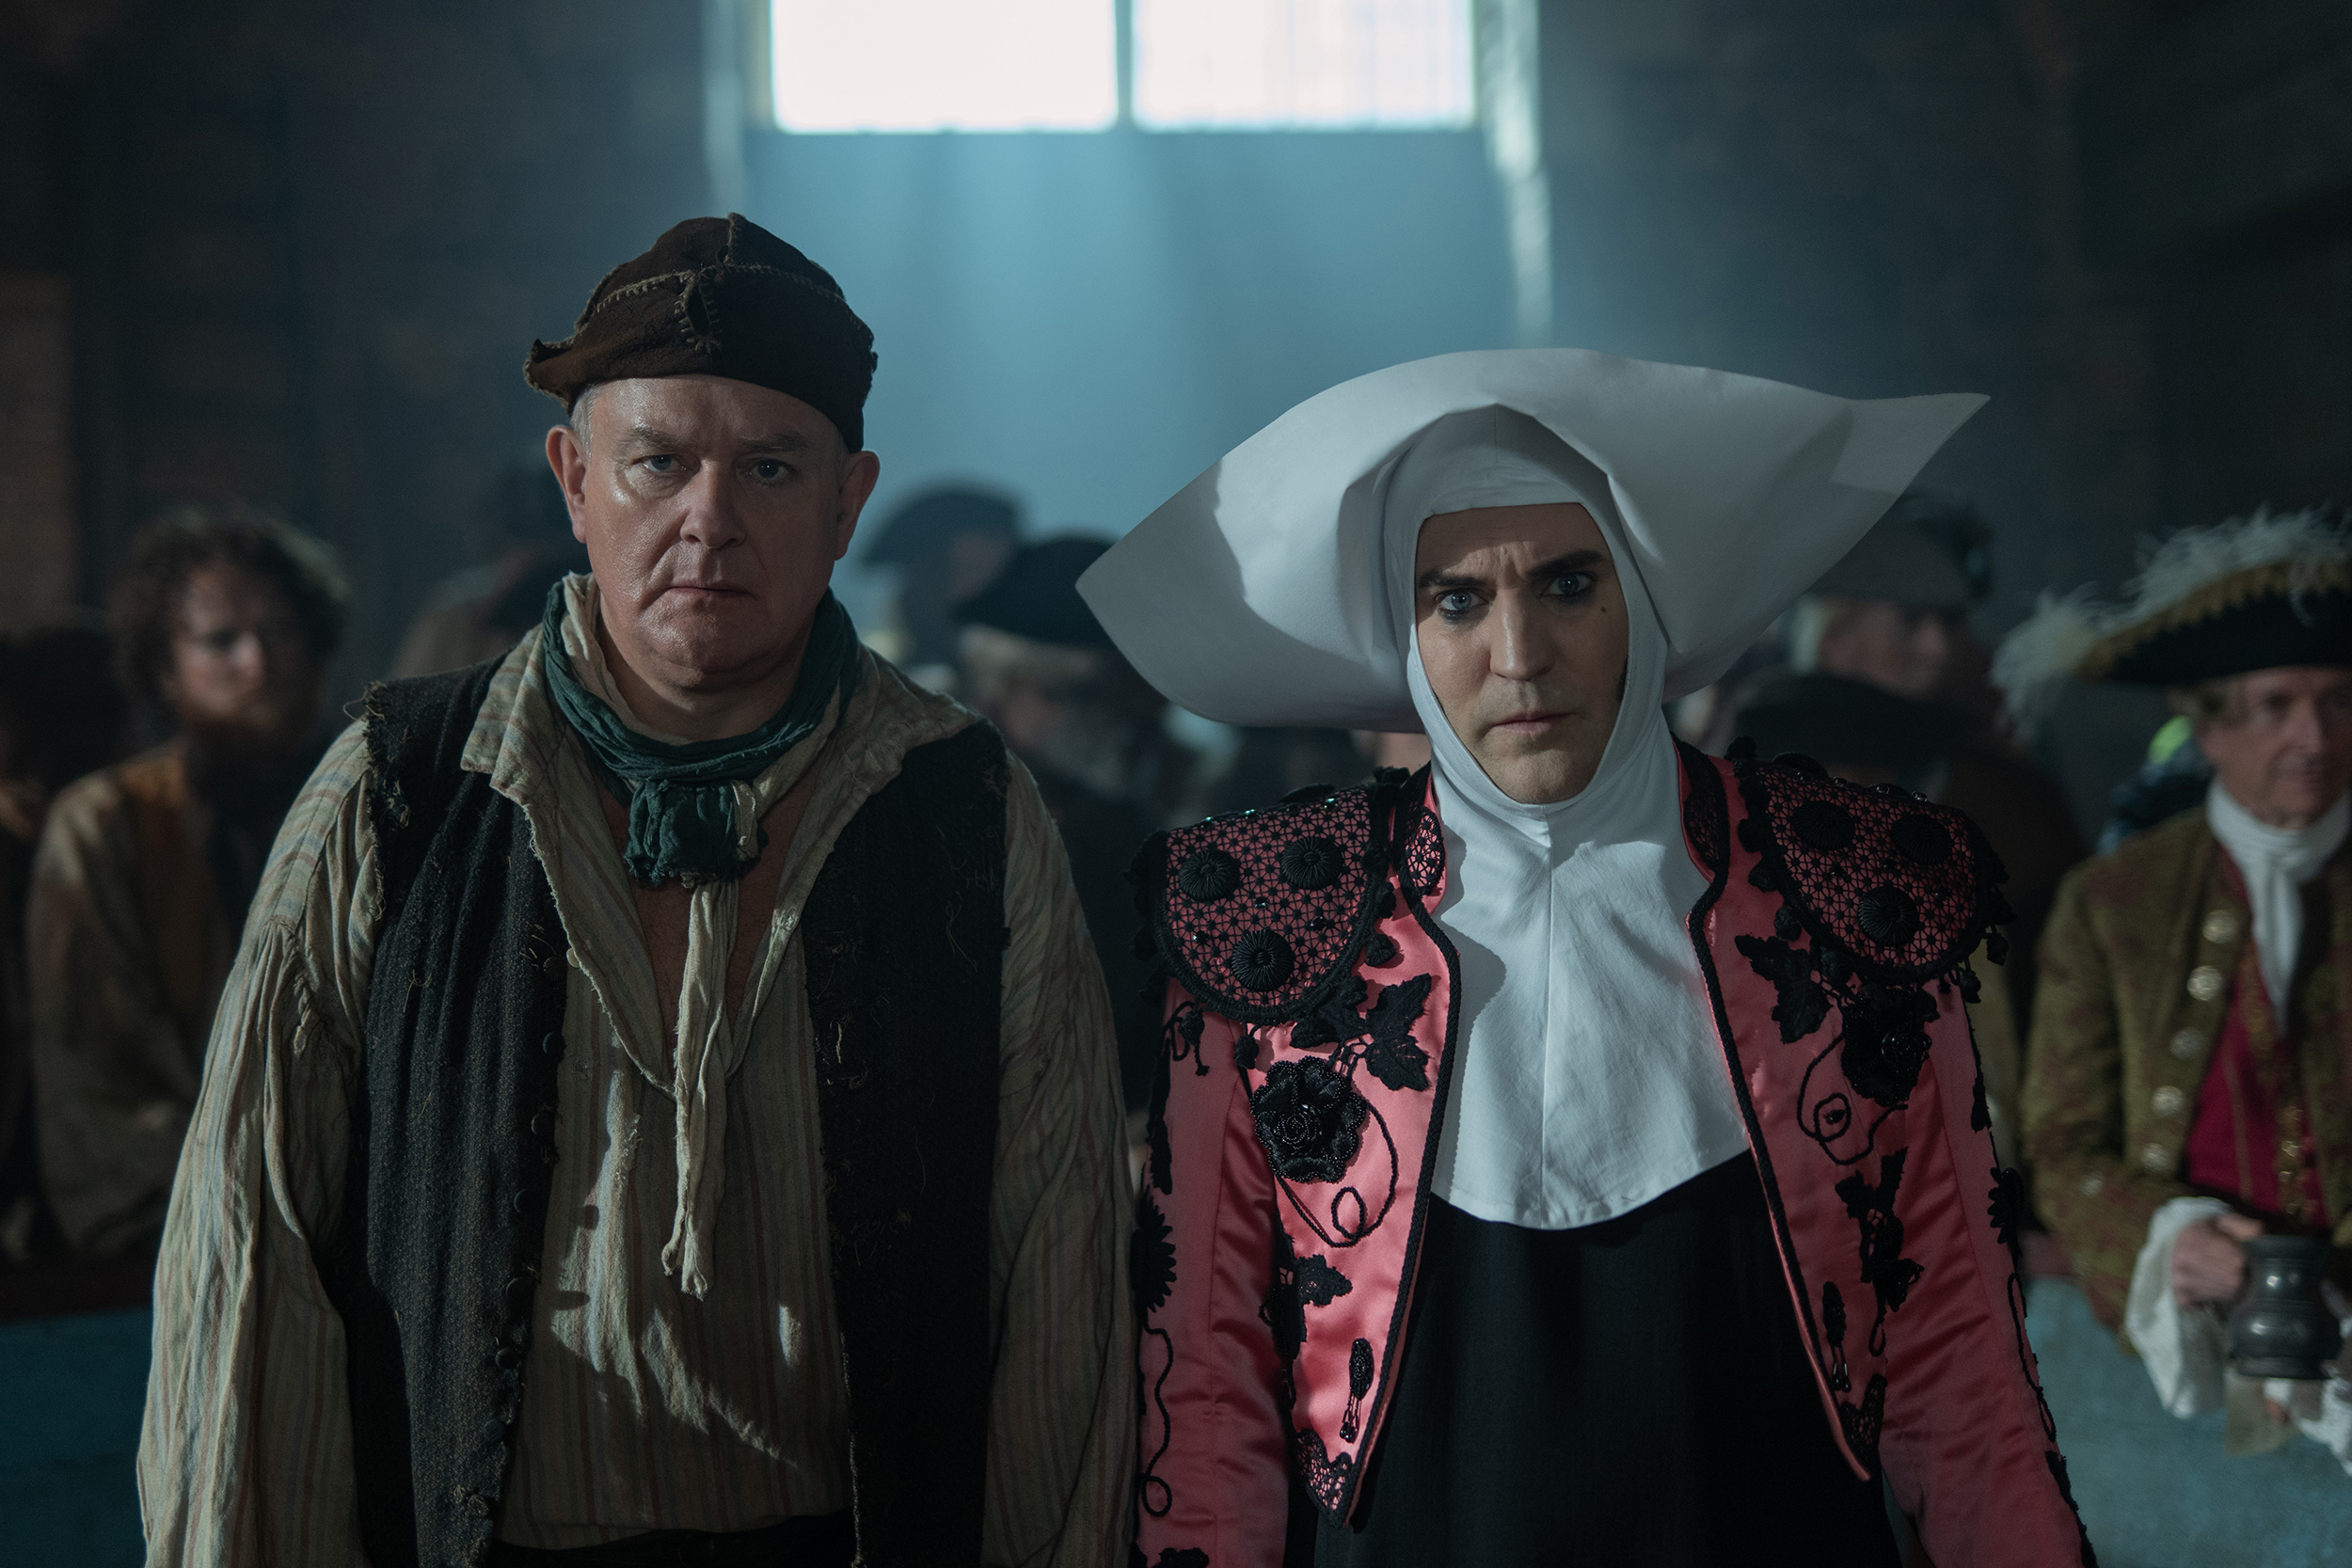 Hugh Bonneville cannot believe Noel Fielding tricked him into this in 'The Completely Made-up Adventures of Dick Turpin' Season 1